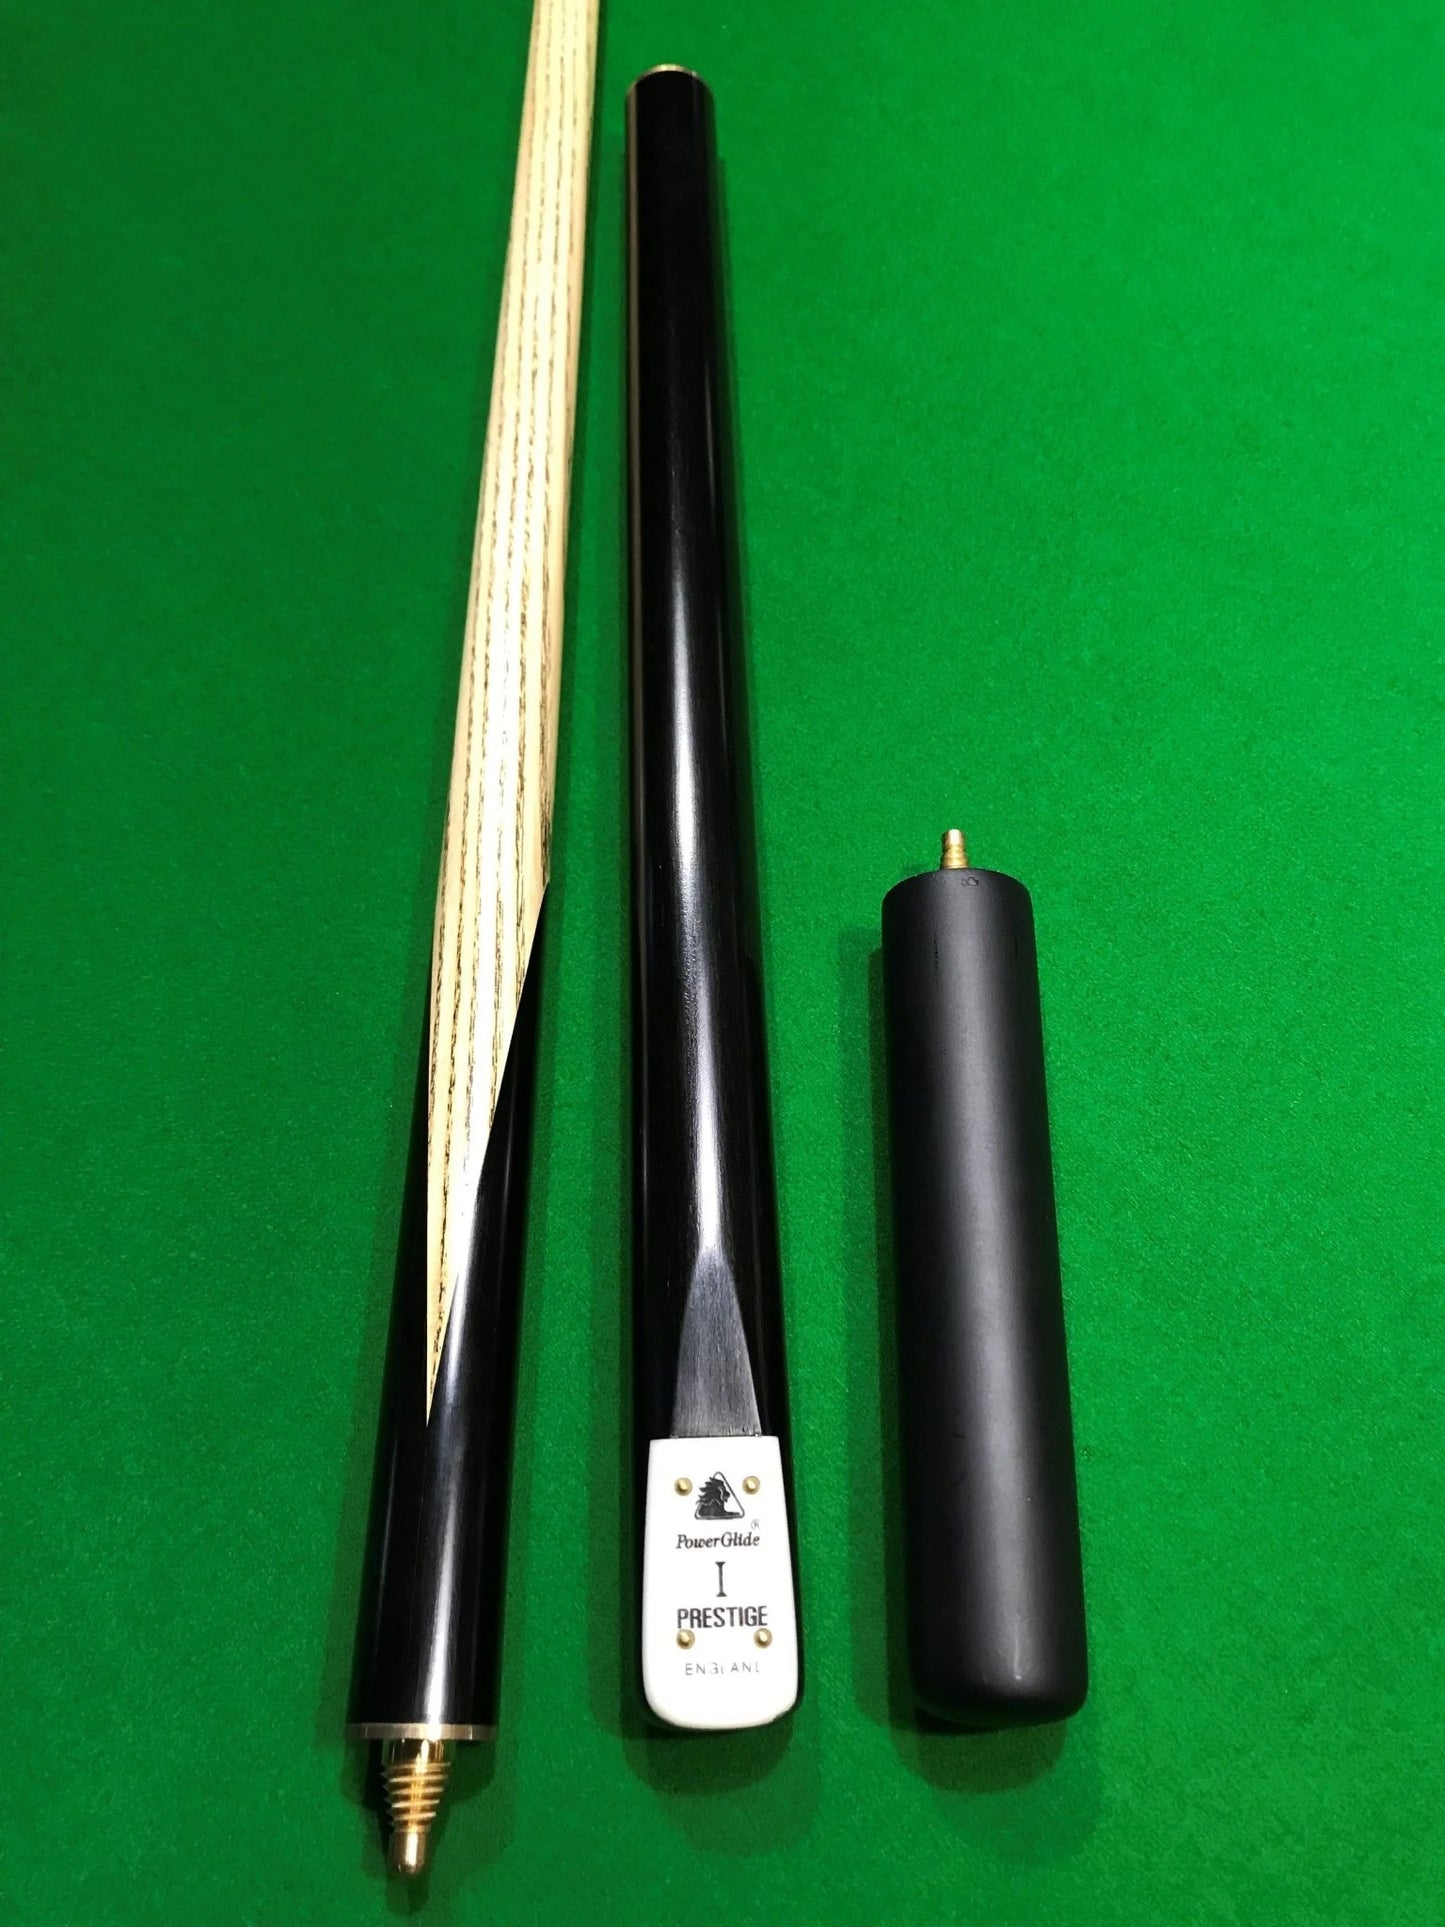 POWERGLIDE Prestige I Hand Made 3/4 Pool, Snooker & Billiard Ash Cue with Butt Extension - Q-Masters